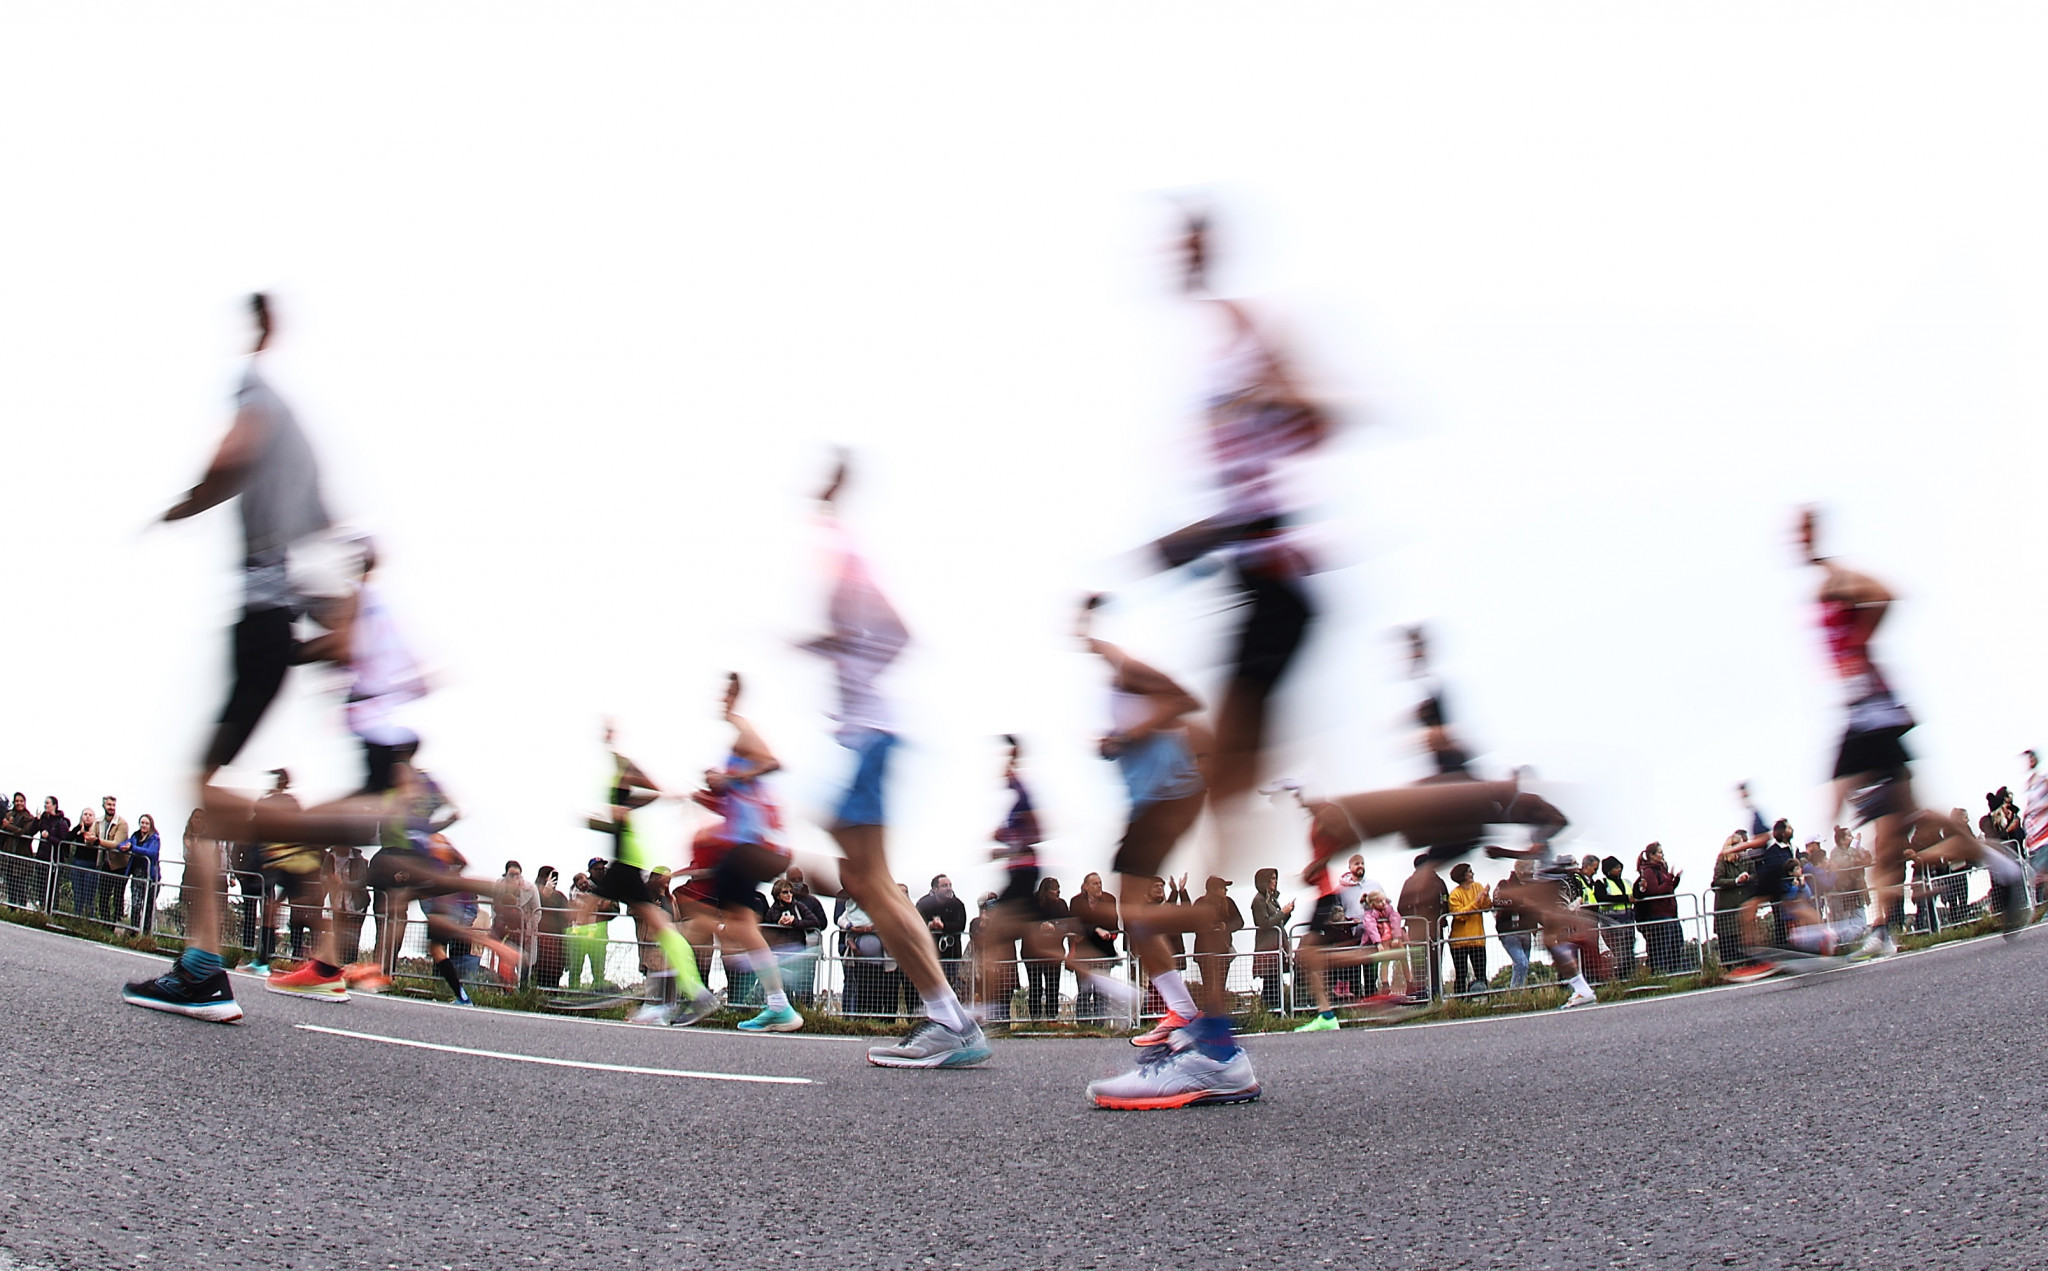 About 2,000 runners are expected to take part in the mass-participation race in Oregon ©Getty Images